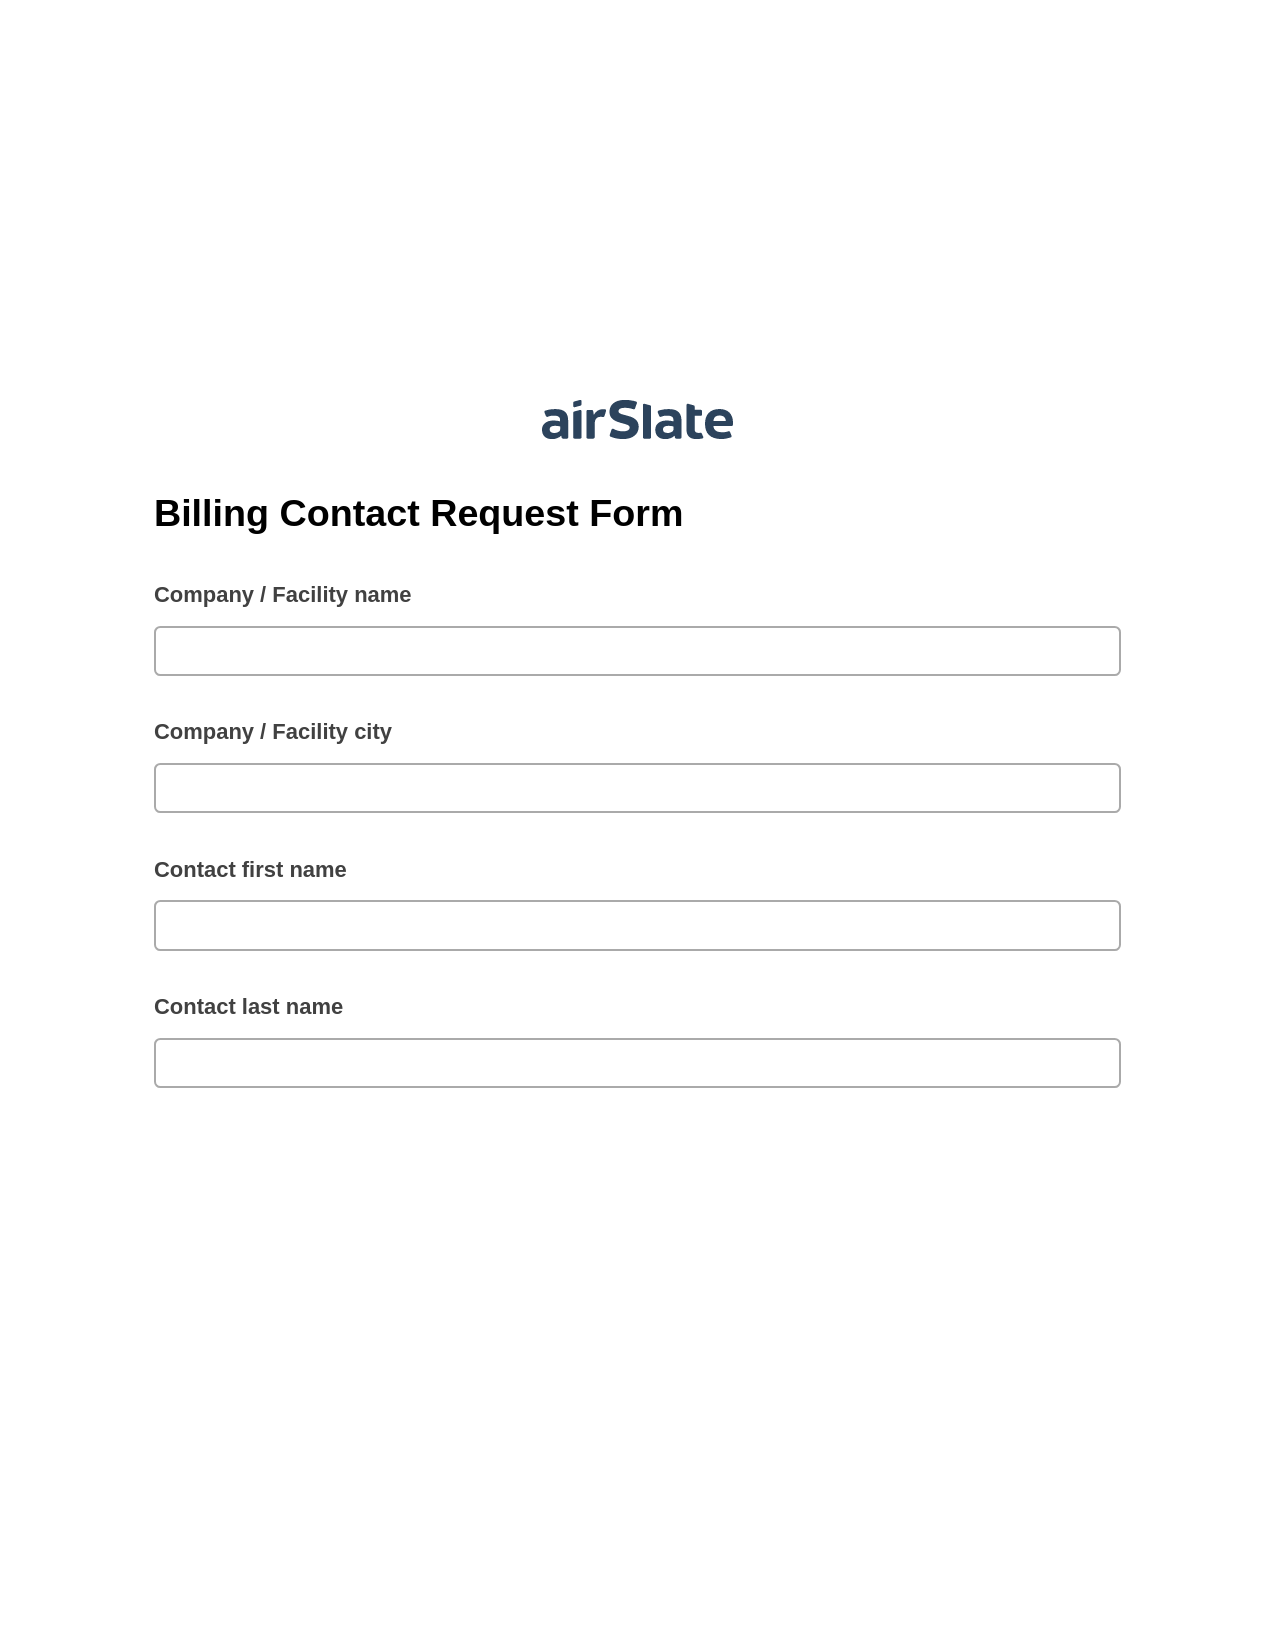 Multirole Billing Contact Request Form Pre-fill from another Slate Bot, Revoke Access Bot, Archive to SharePoint Folder Bot